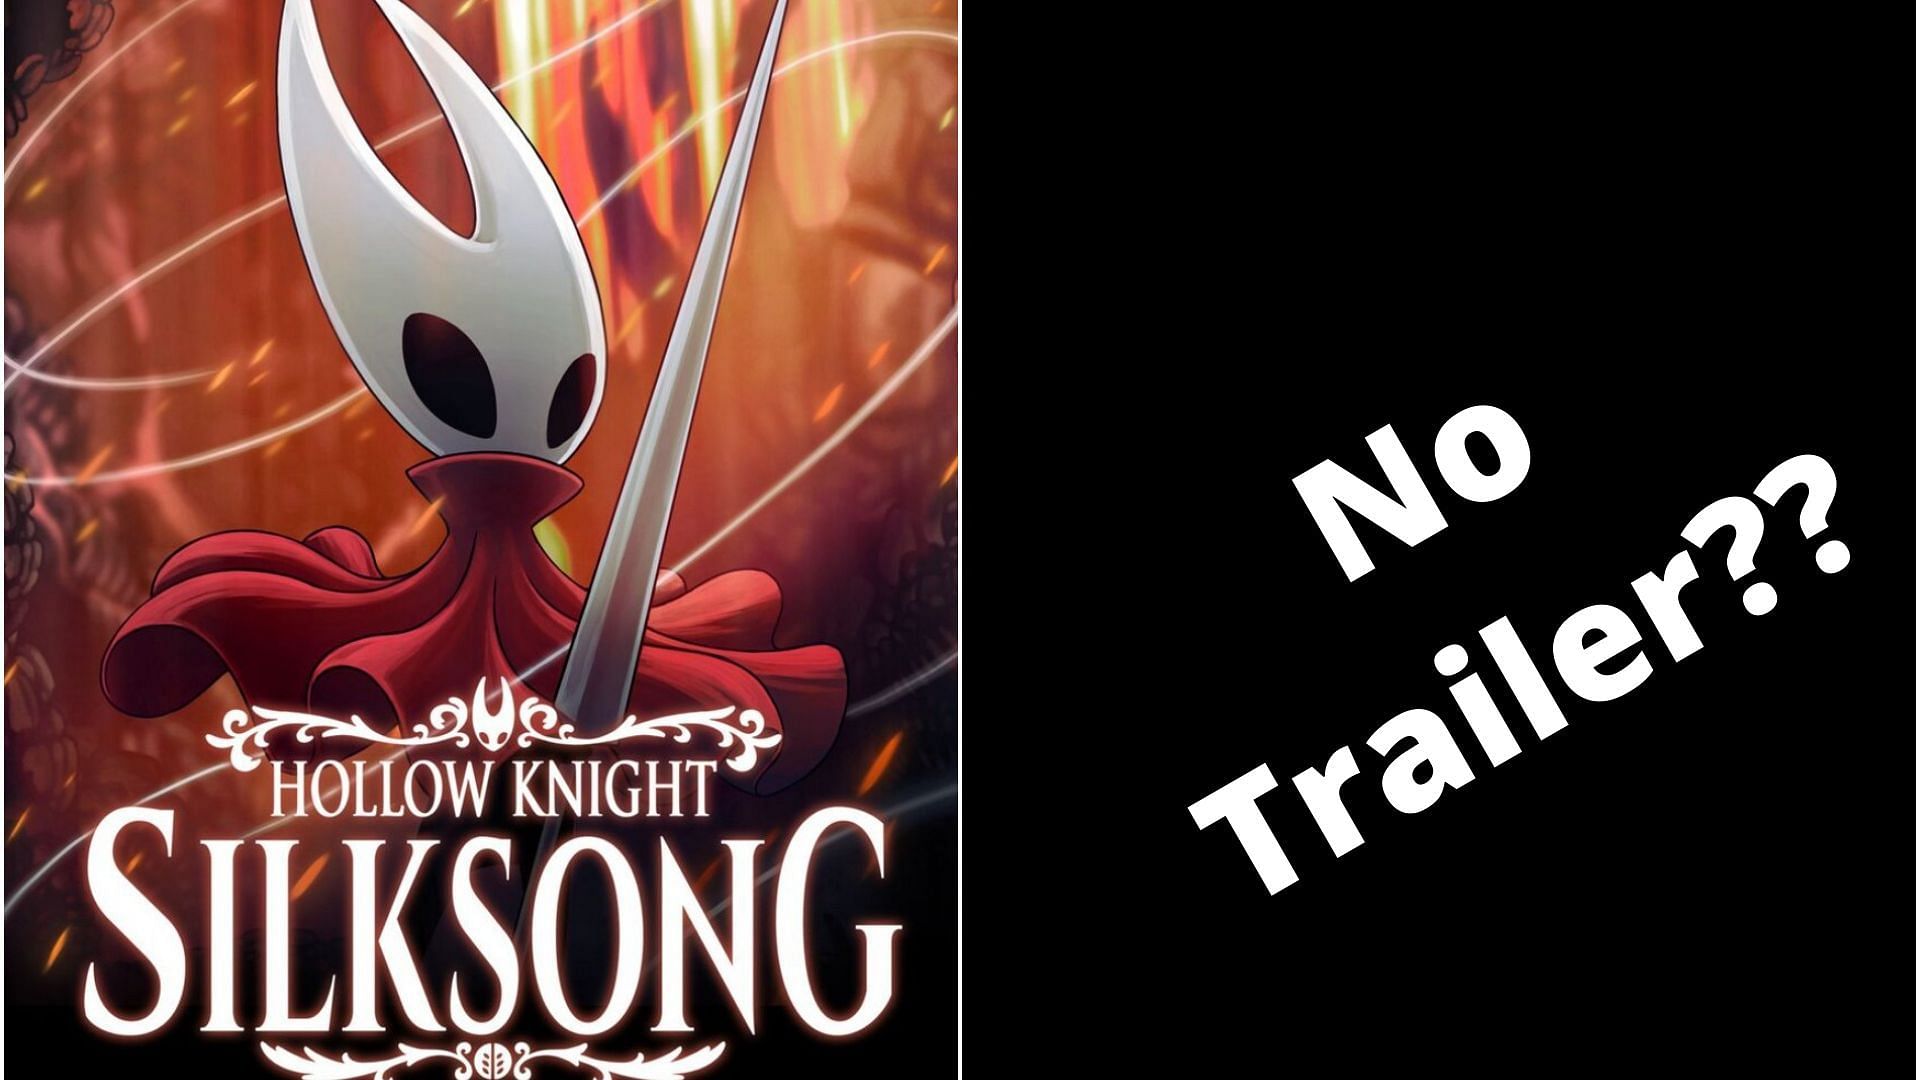 Hollow Knight: Silksong was a no show at The Game Awards 2021 (Image via Sportskeeda)